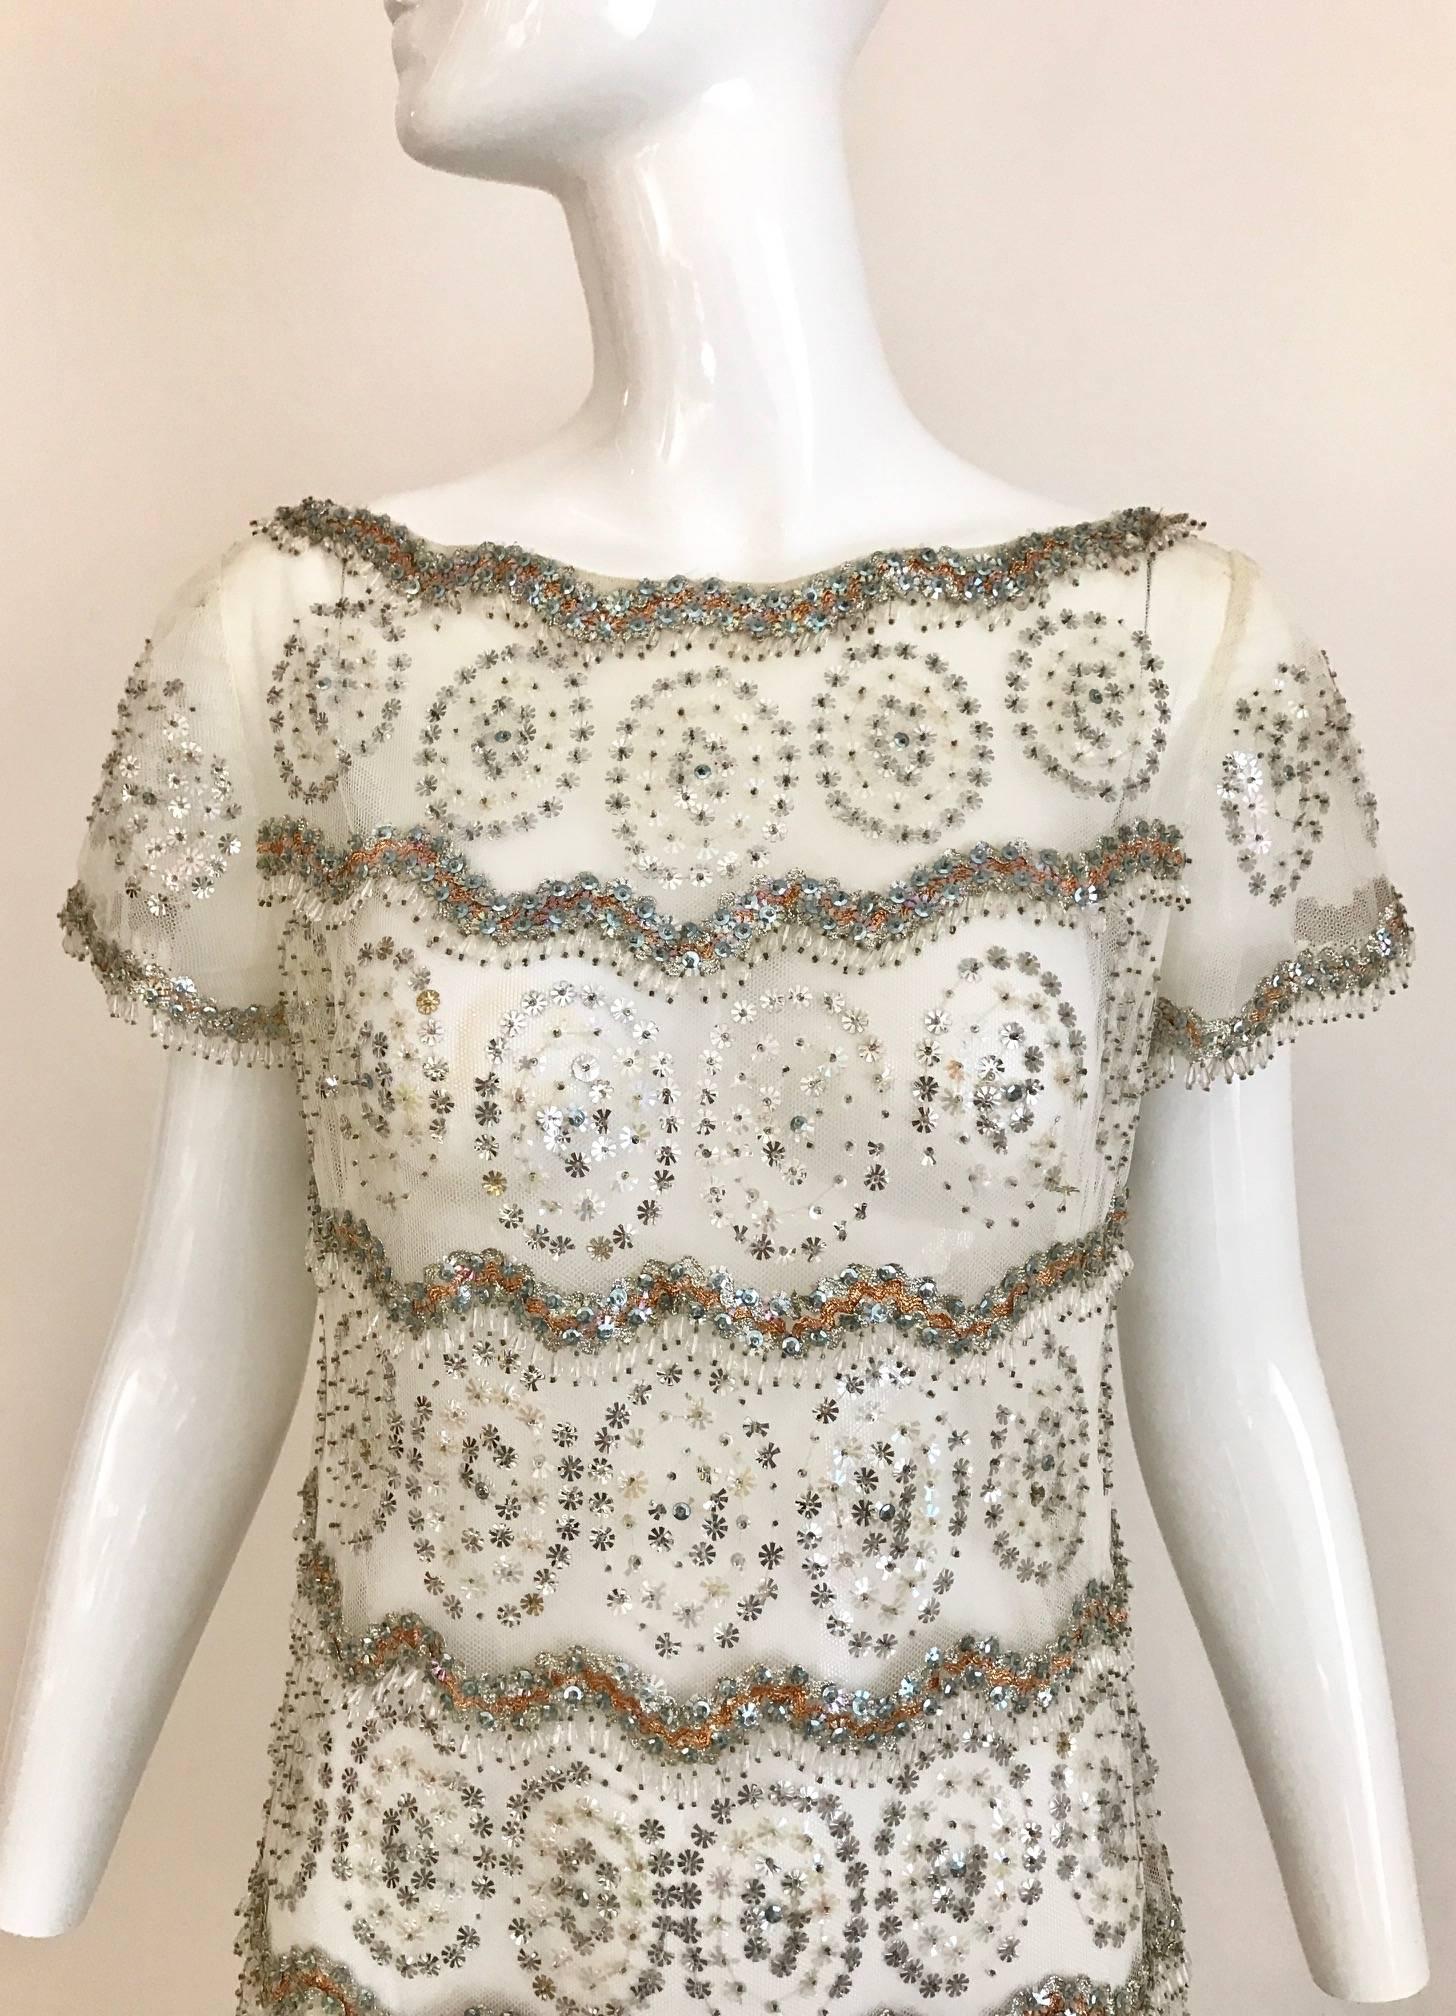 Beautiful Malcolm Starr 1960s White Mesh tulle wedding dress embellished in silver and gold sequins paillettes trough out the dress. 
Dress comes with slip.   Size: Small - Medium
Bust: 36 inch  
Waist: 34 inch
Hip: 36 inch
Length: 55 inch

